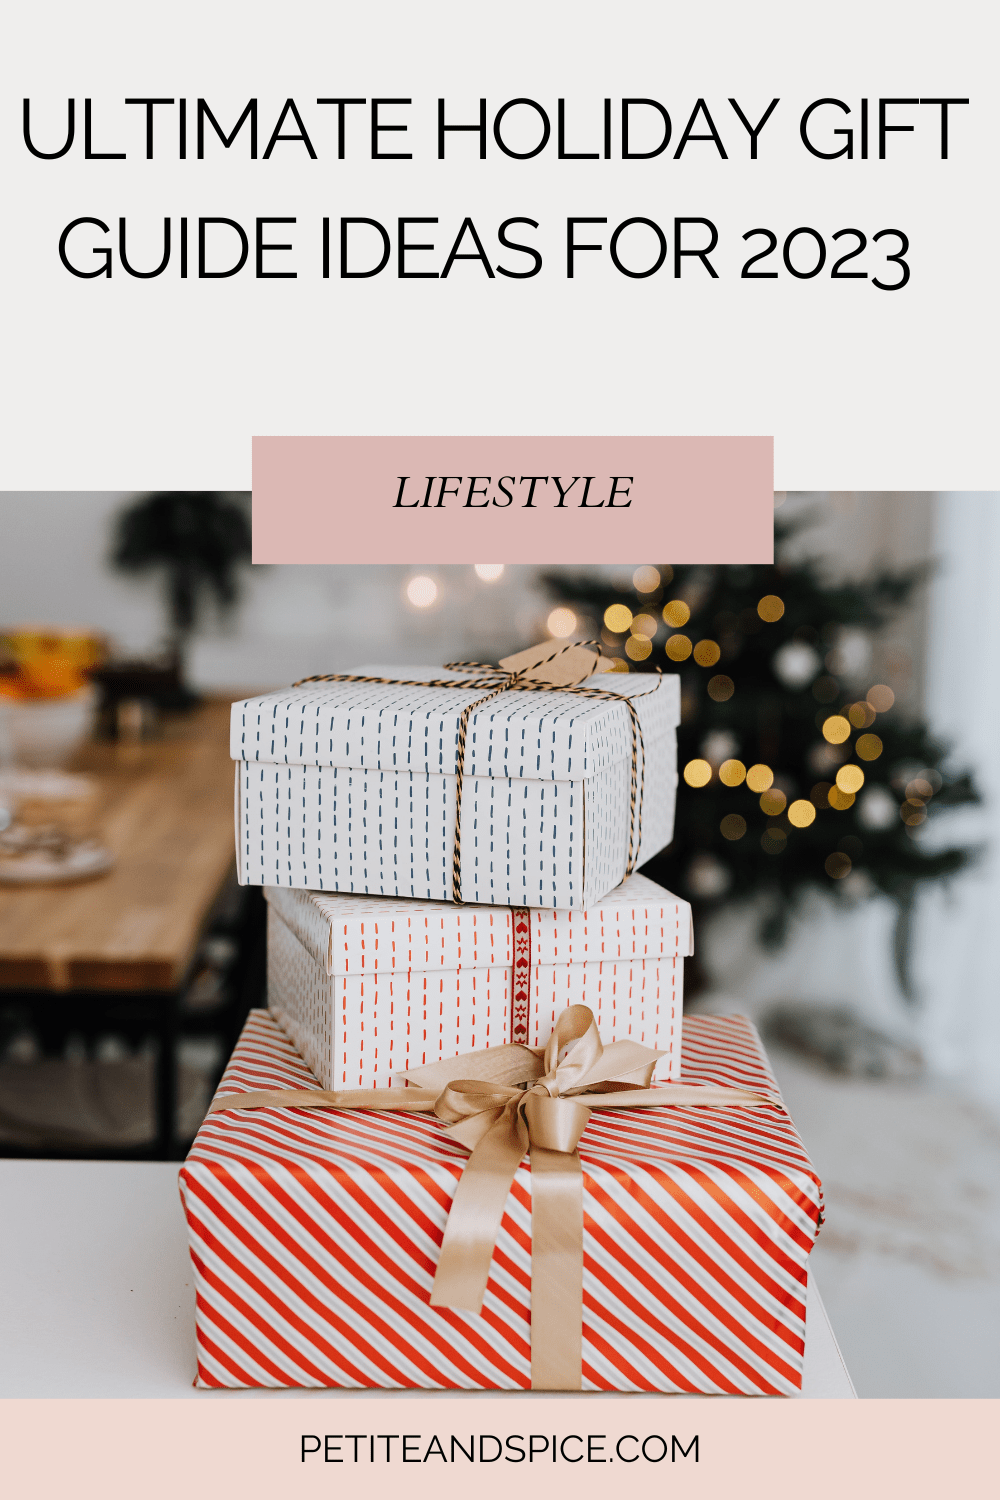 Ultimate Holiday Gift Guide Ideas for 2023